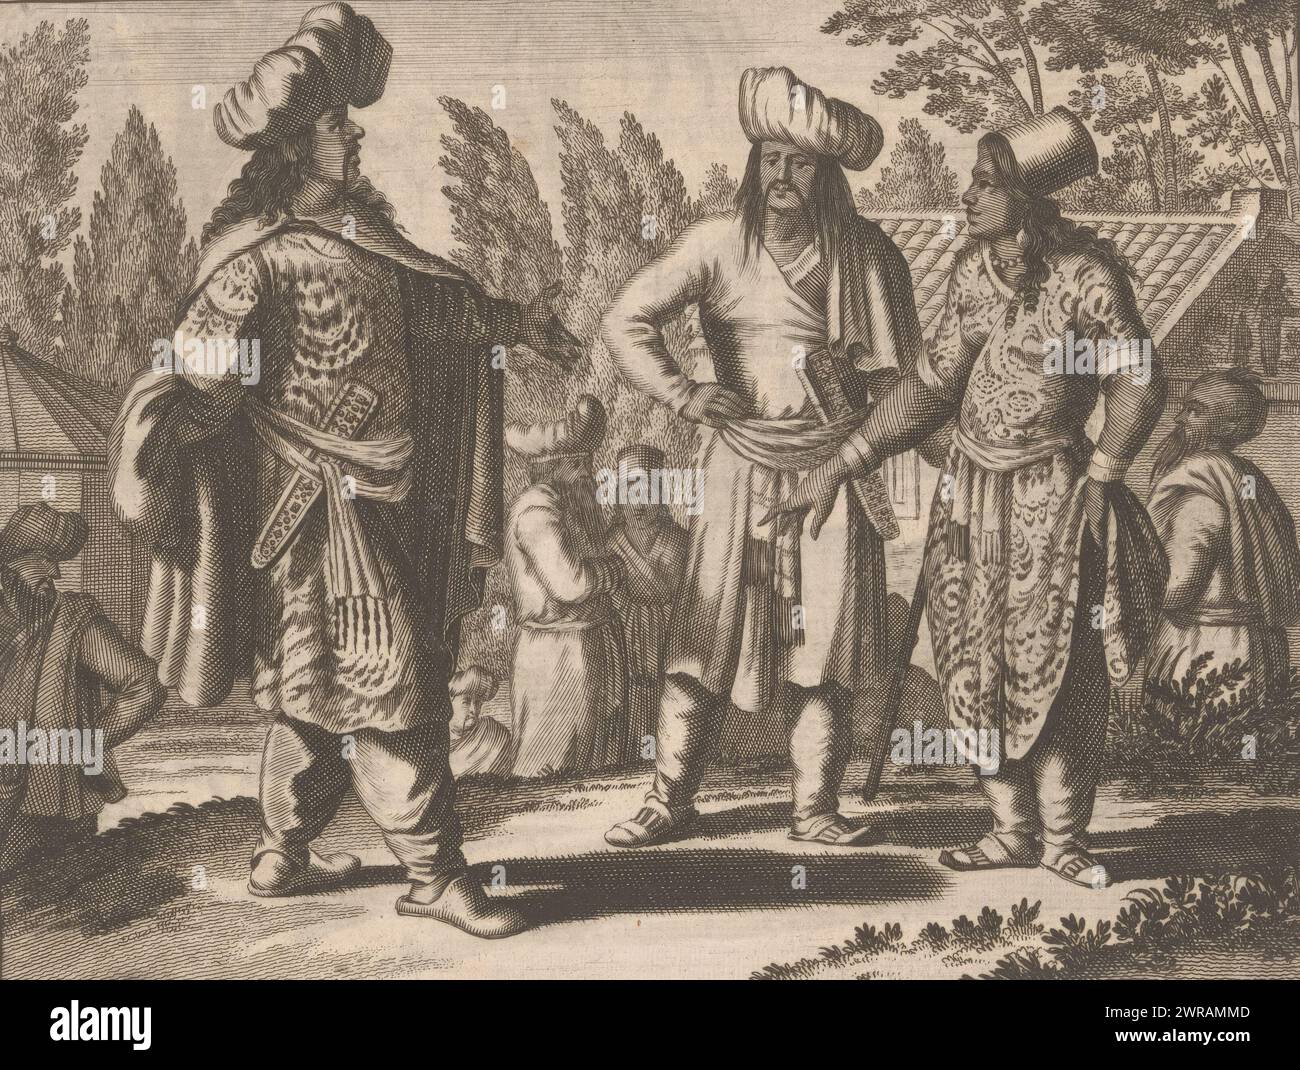 Clothing of residents of India, print maker: anonymous, publisher: Jacob van Meurs, Staten van Holland en West-Friesland, Amsterdam, 1672, paper, engraving, etching, letterpress printing, height 129 mm × width 167 mm, print Stock Photo